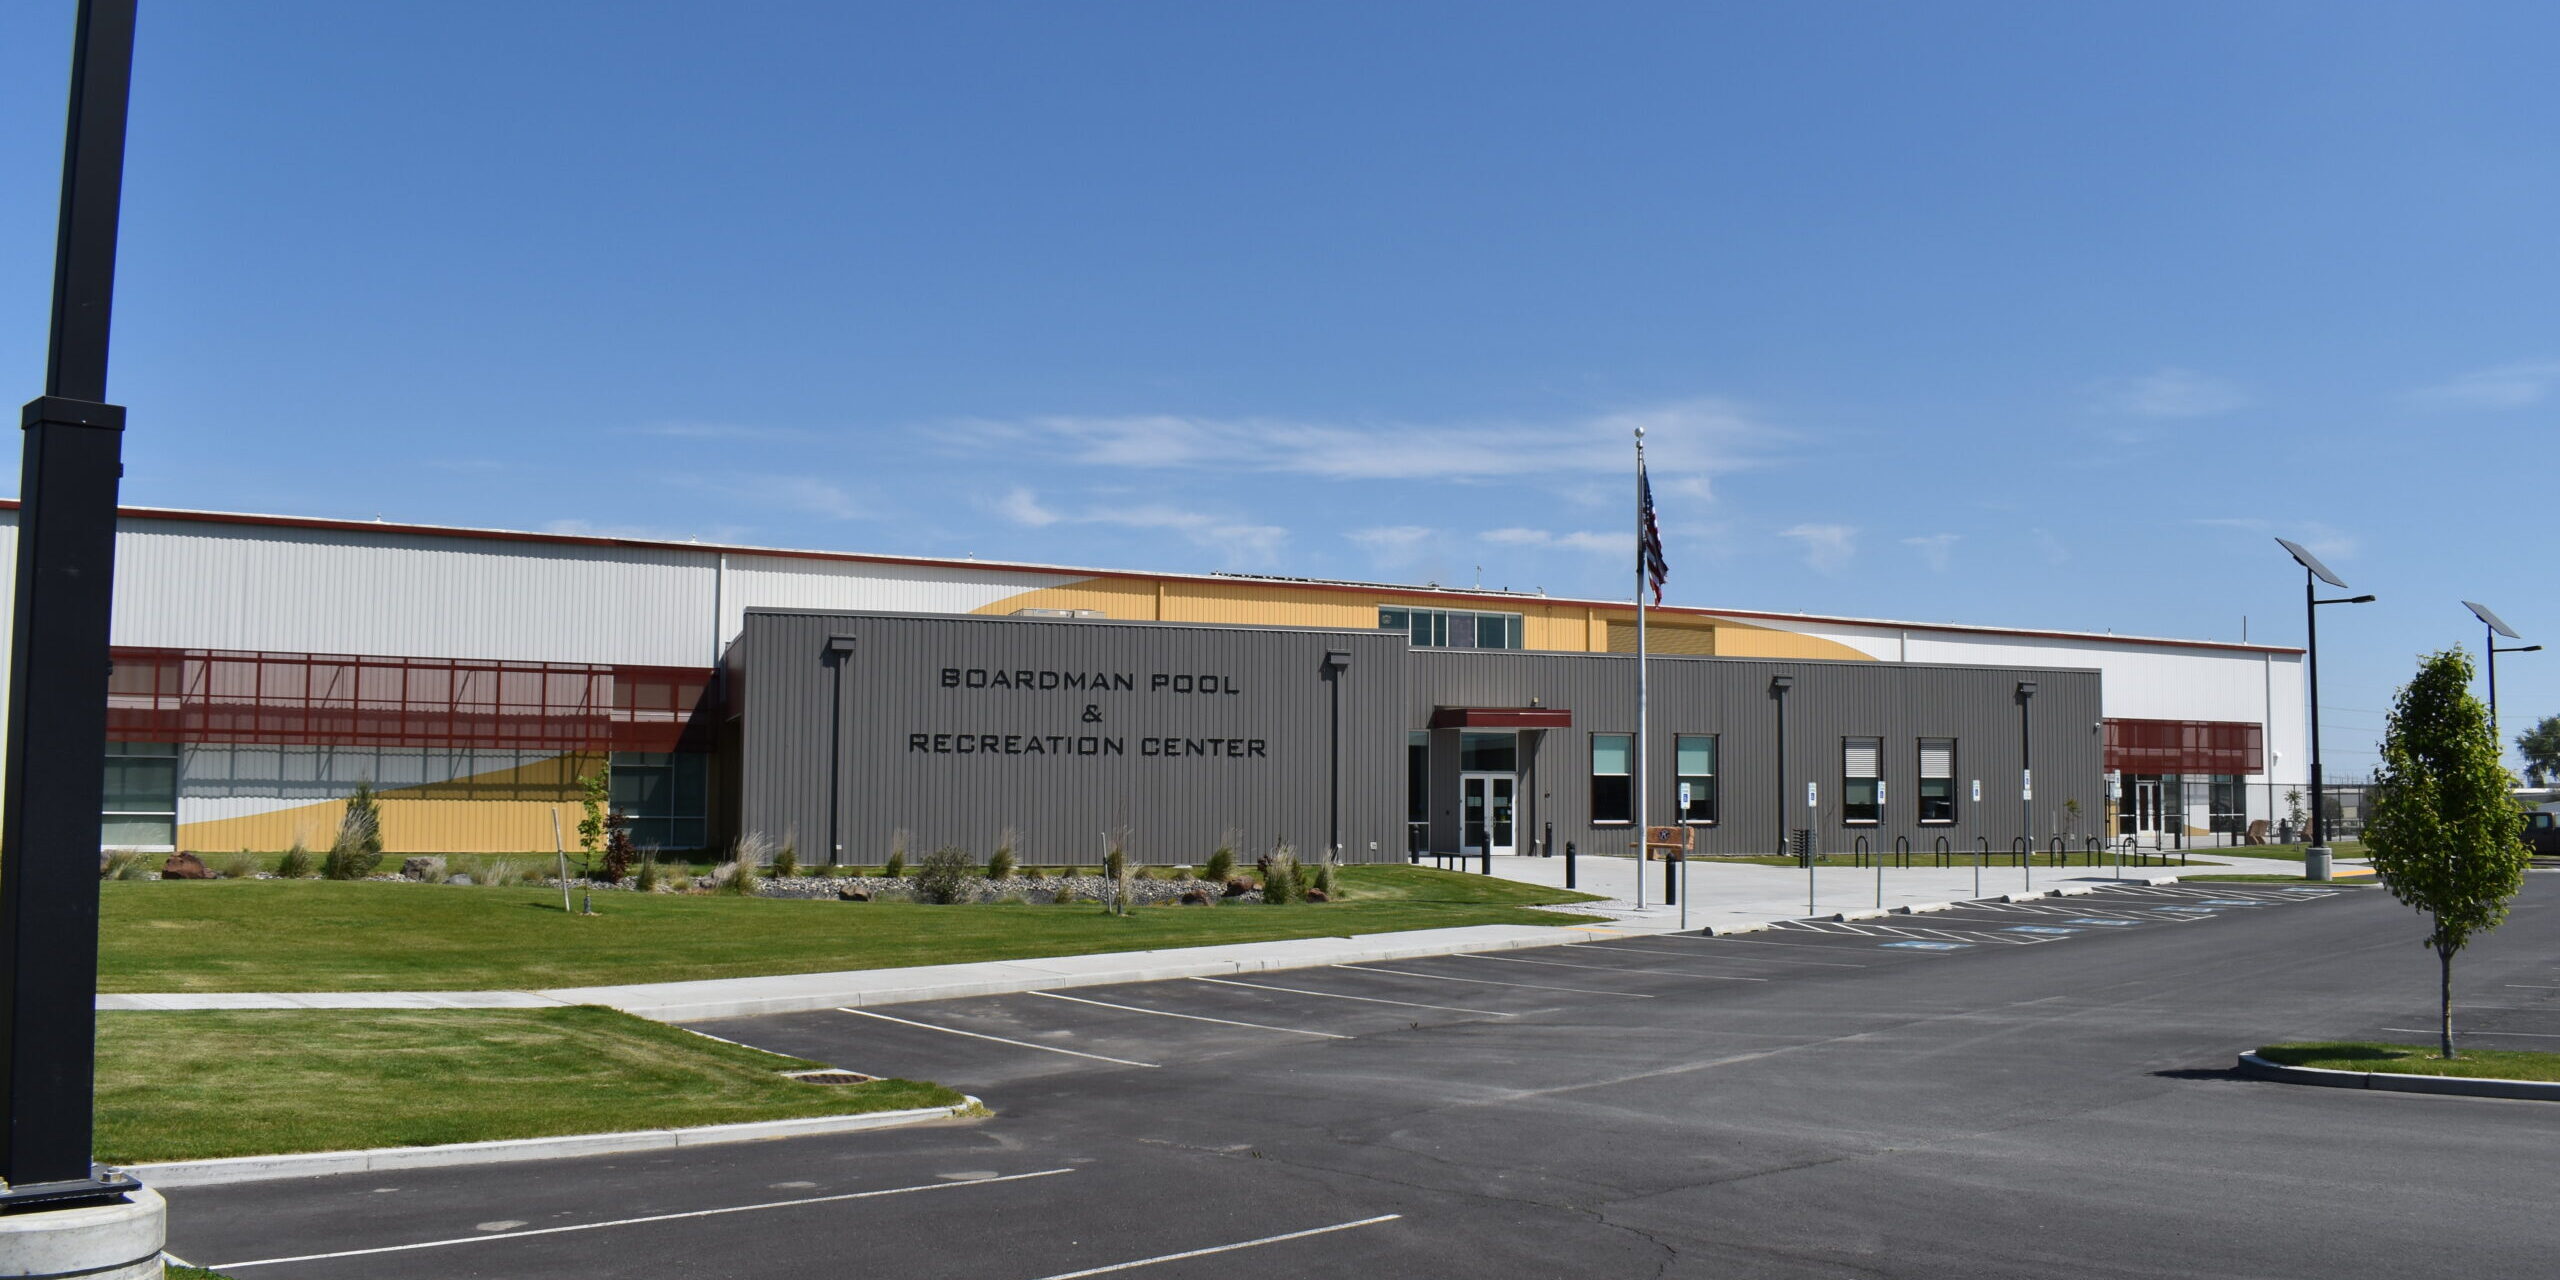 Boardman Pool & Recreational Center Building Exterior and parking lot.